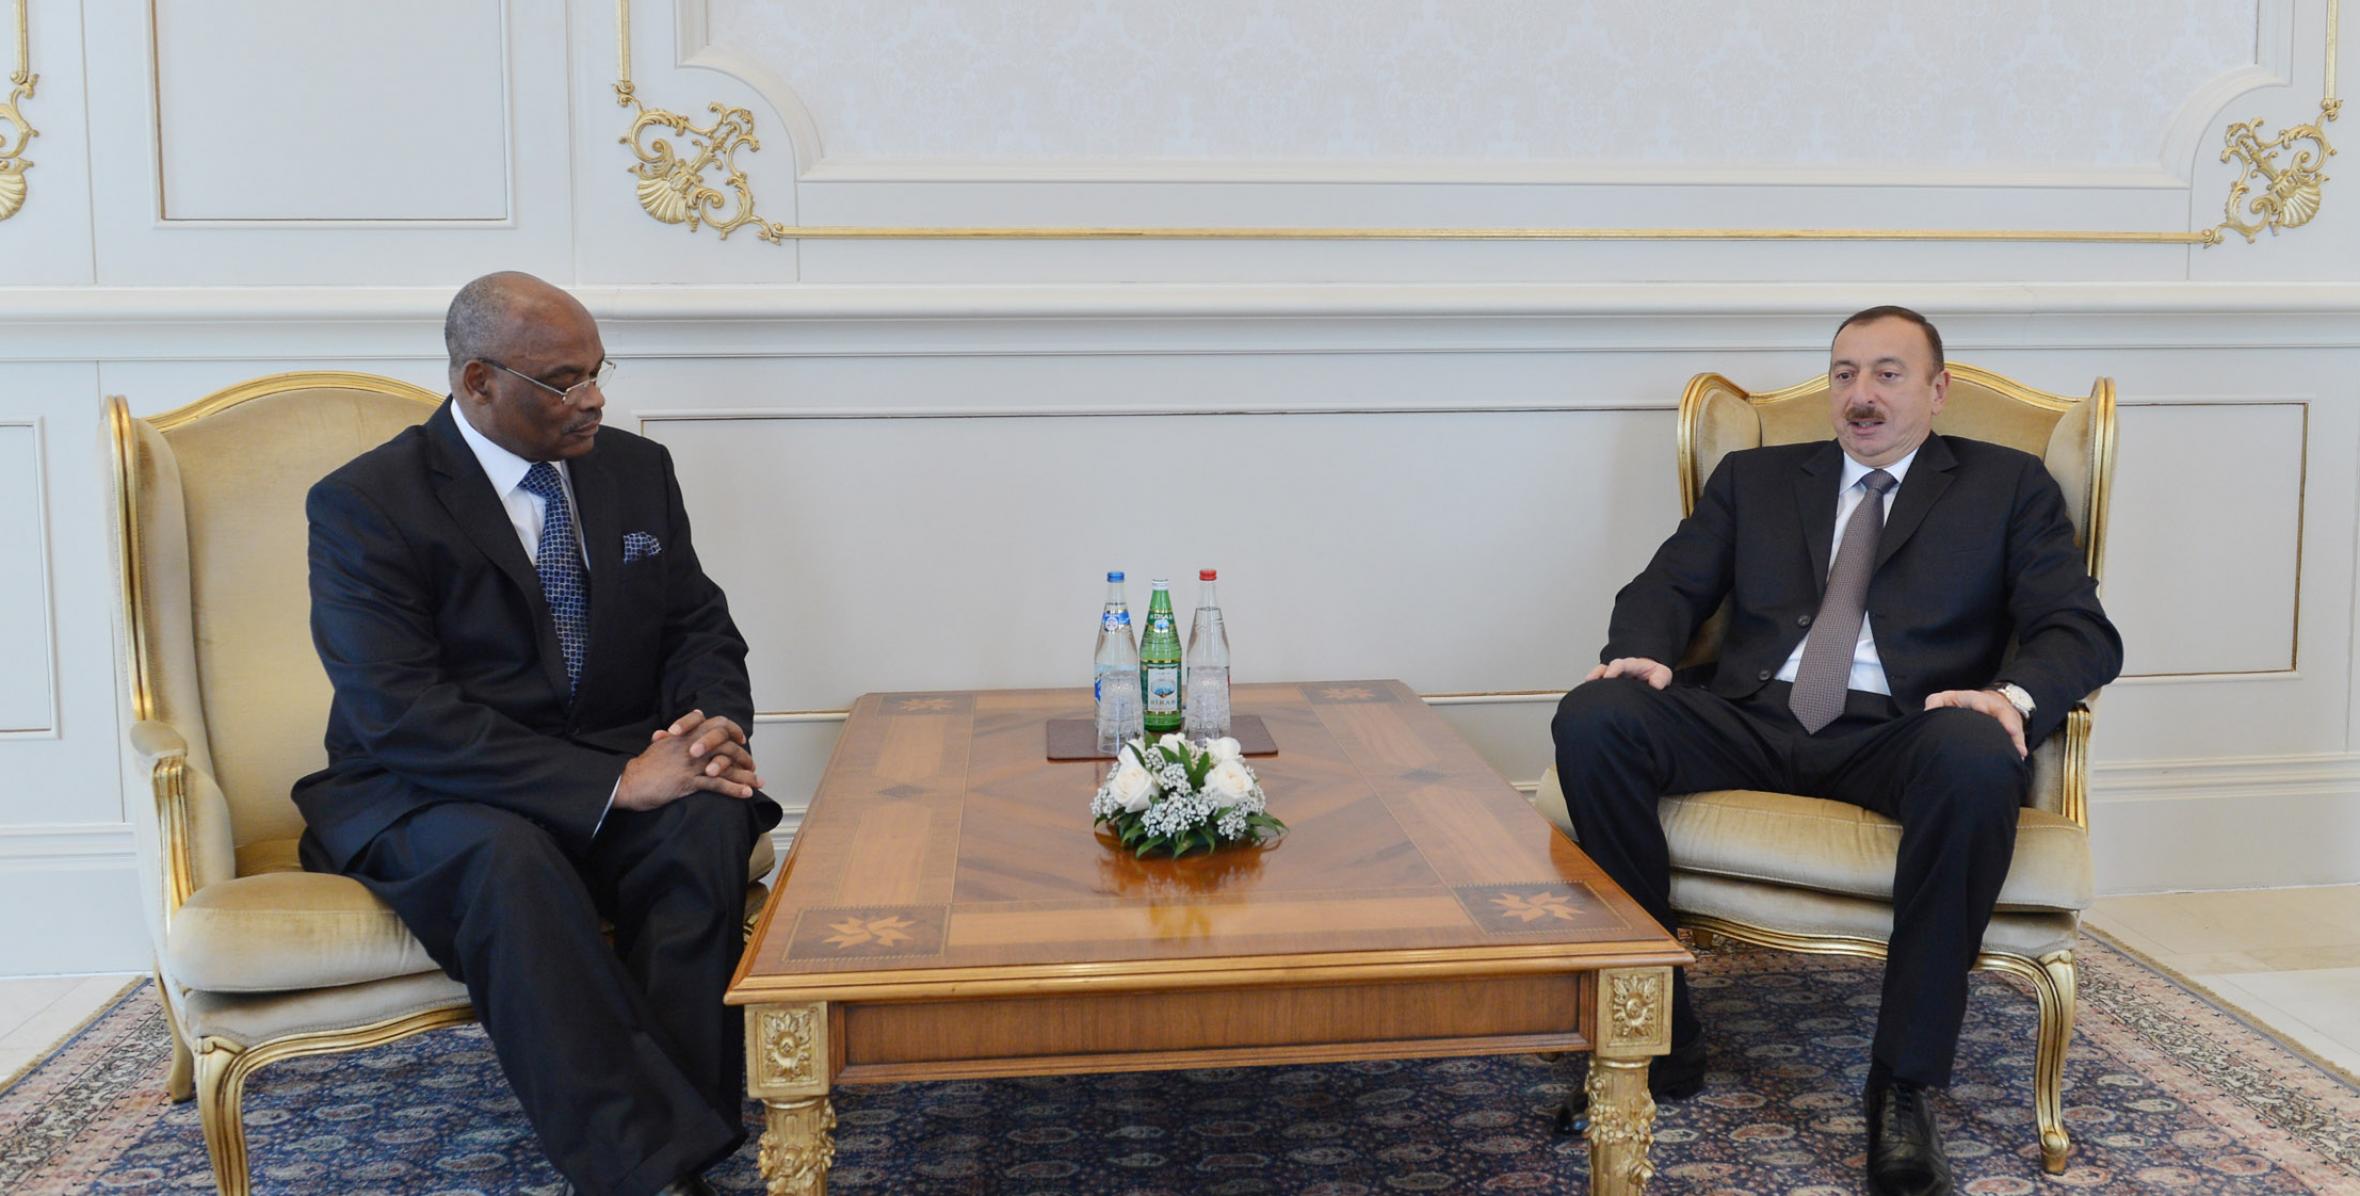 Ilham Aliyev received the credentials of the newly-appointed Ambassador of Zambia to Azerbaijan